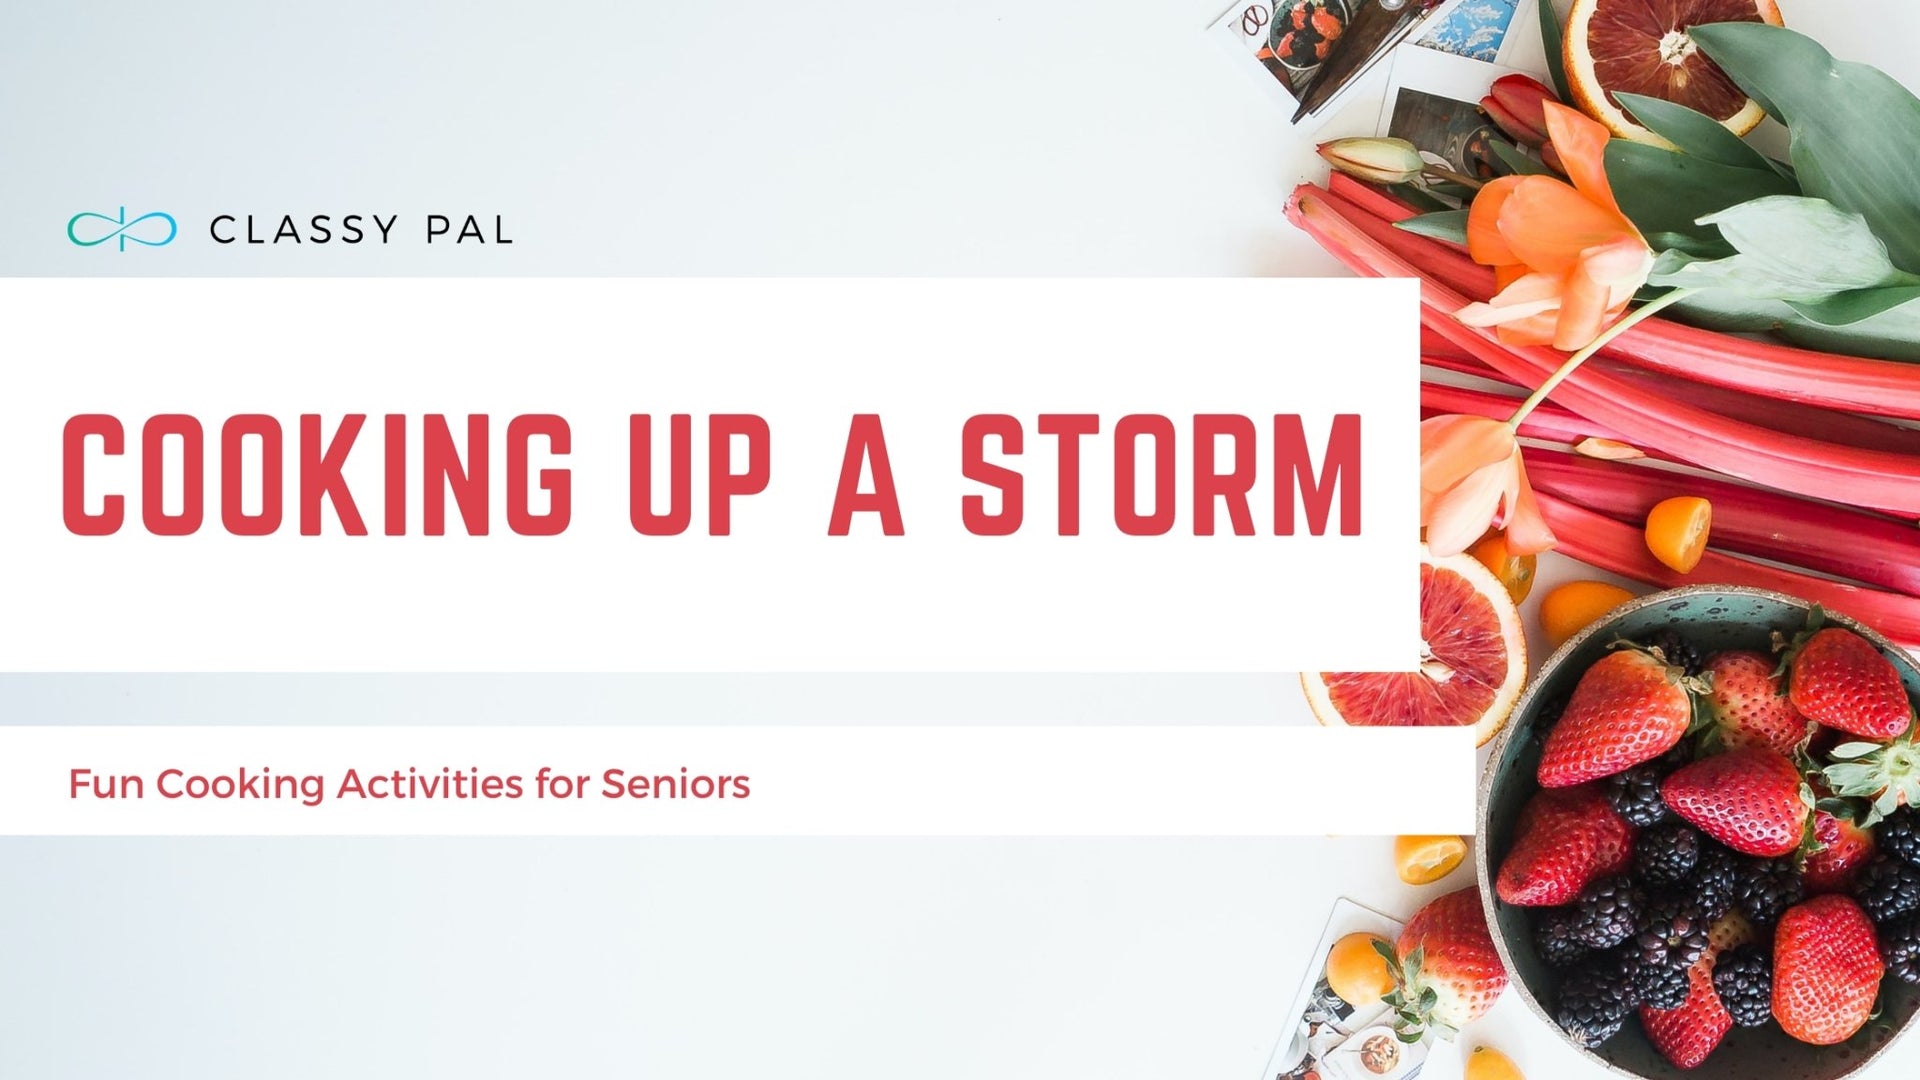 Cooking Up a Storm: Fun Cooking Activities for Seniors | Classy Pal